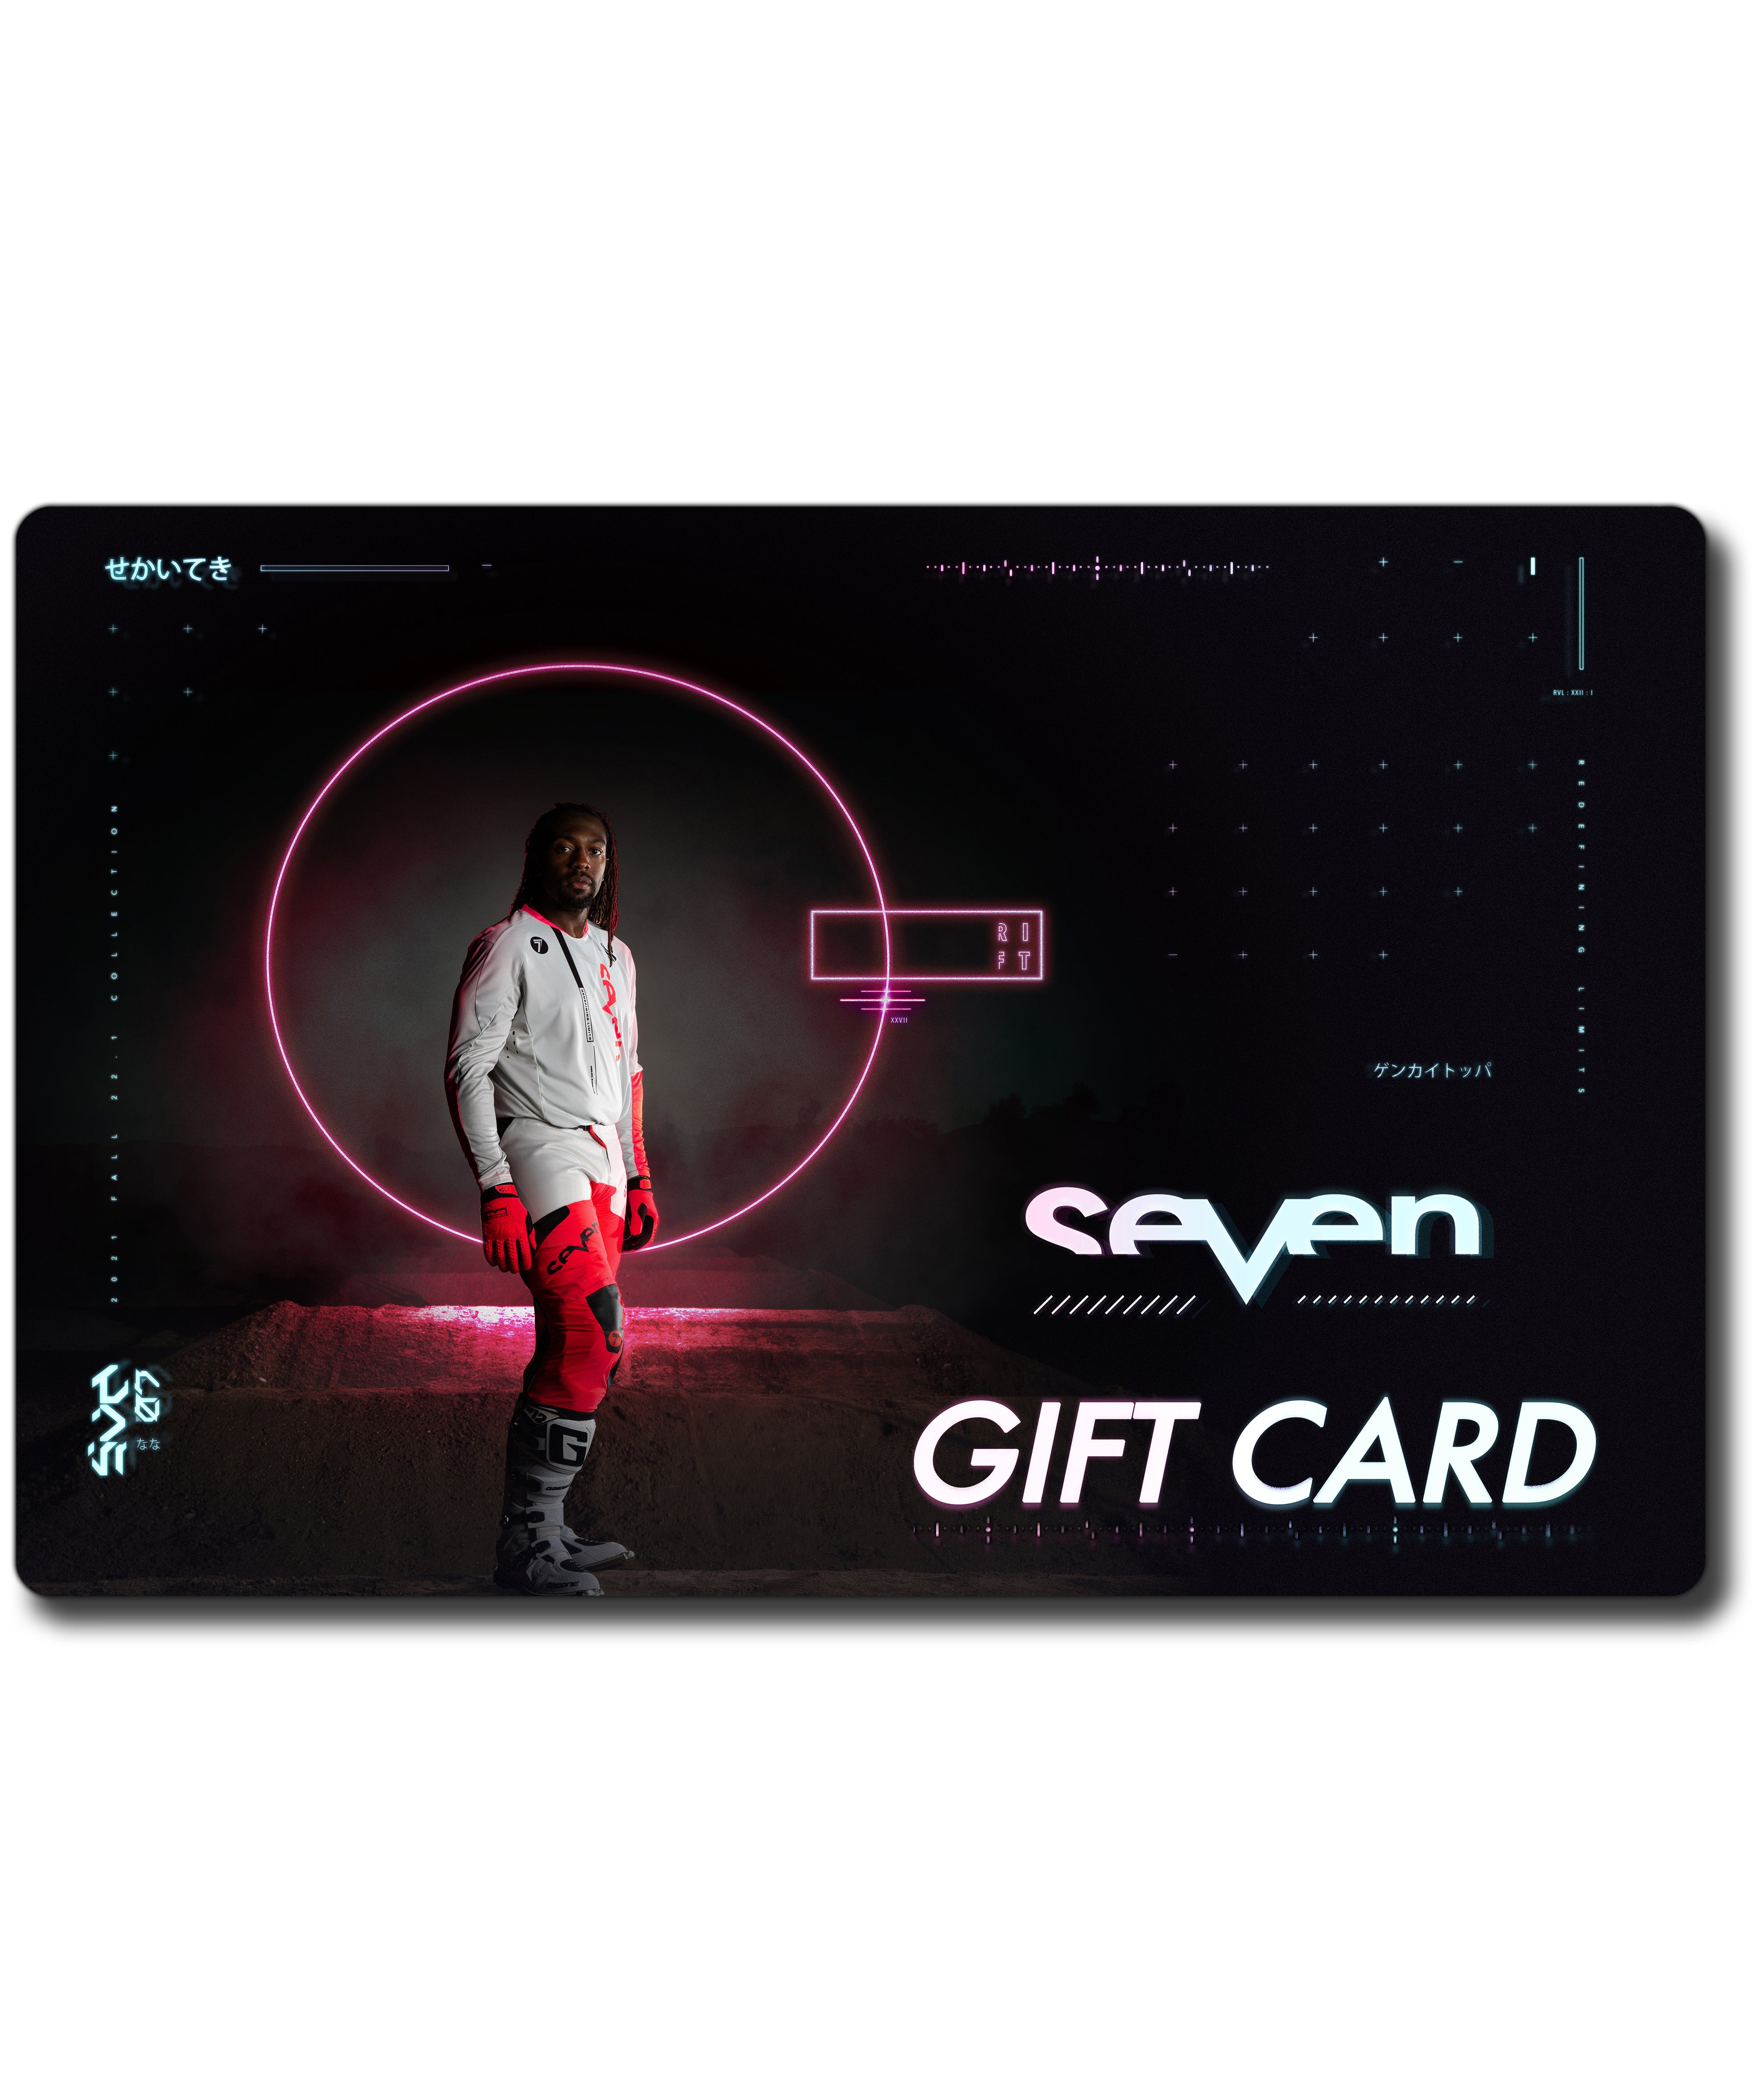 Seven Gift Card